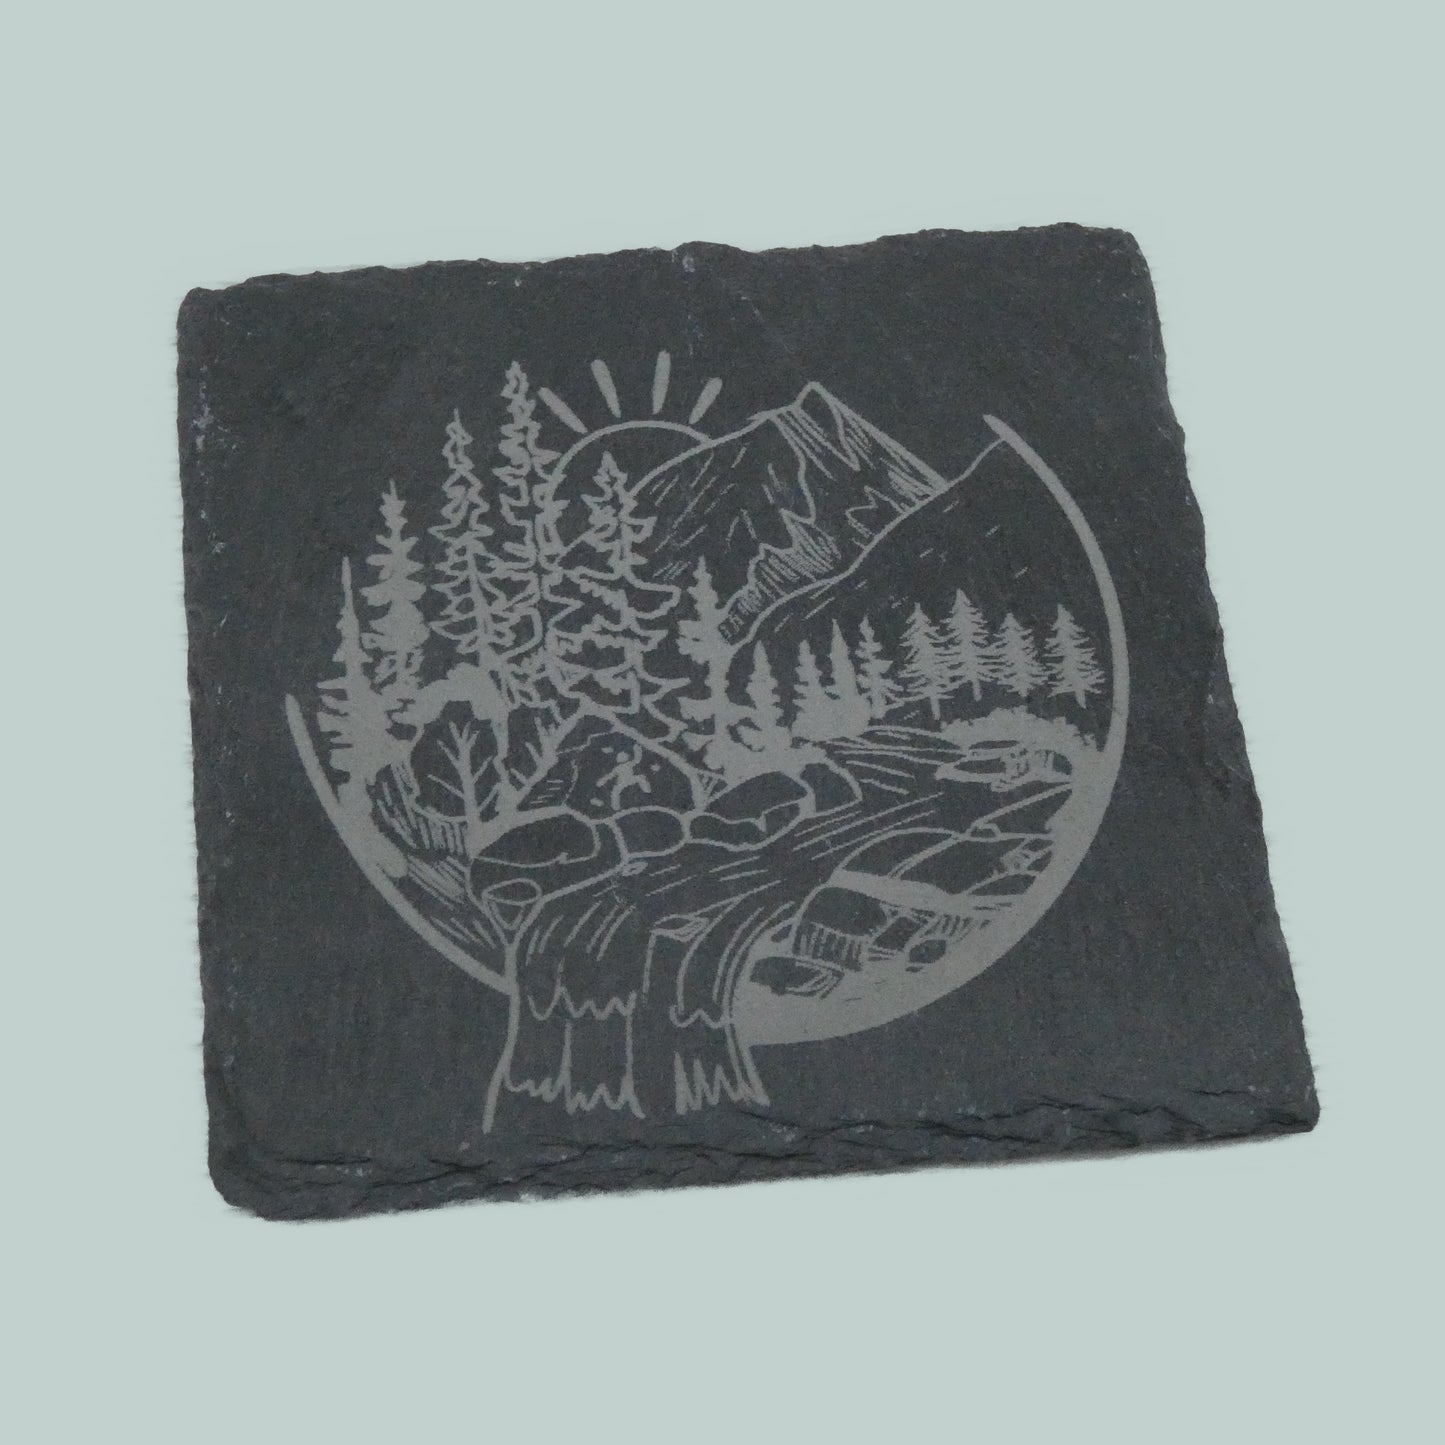 Set of 2 Customisable coasters for Climber, Climbing and Bouldering